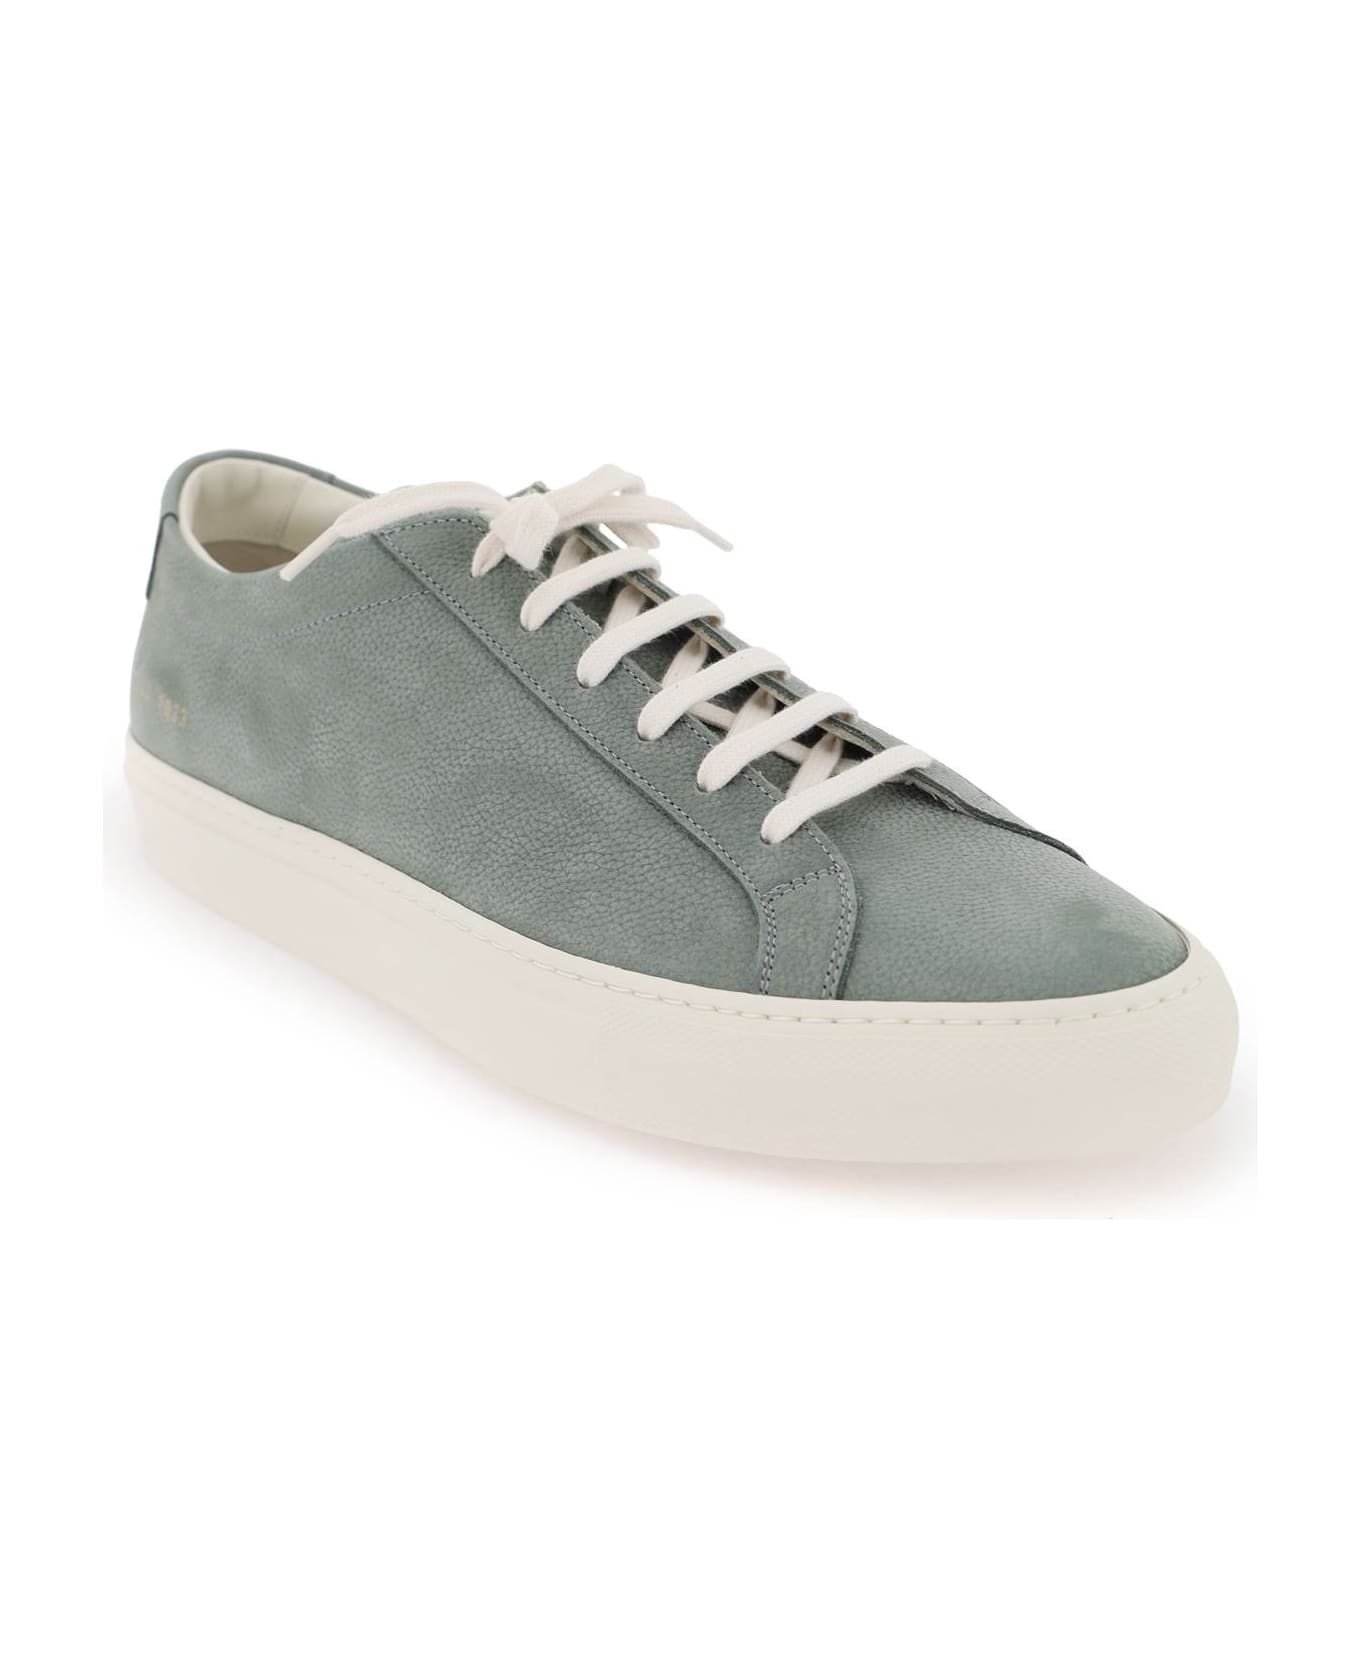 Common Projects Original Achilles Sneakers - SAGE (Green) スニーカー